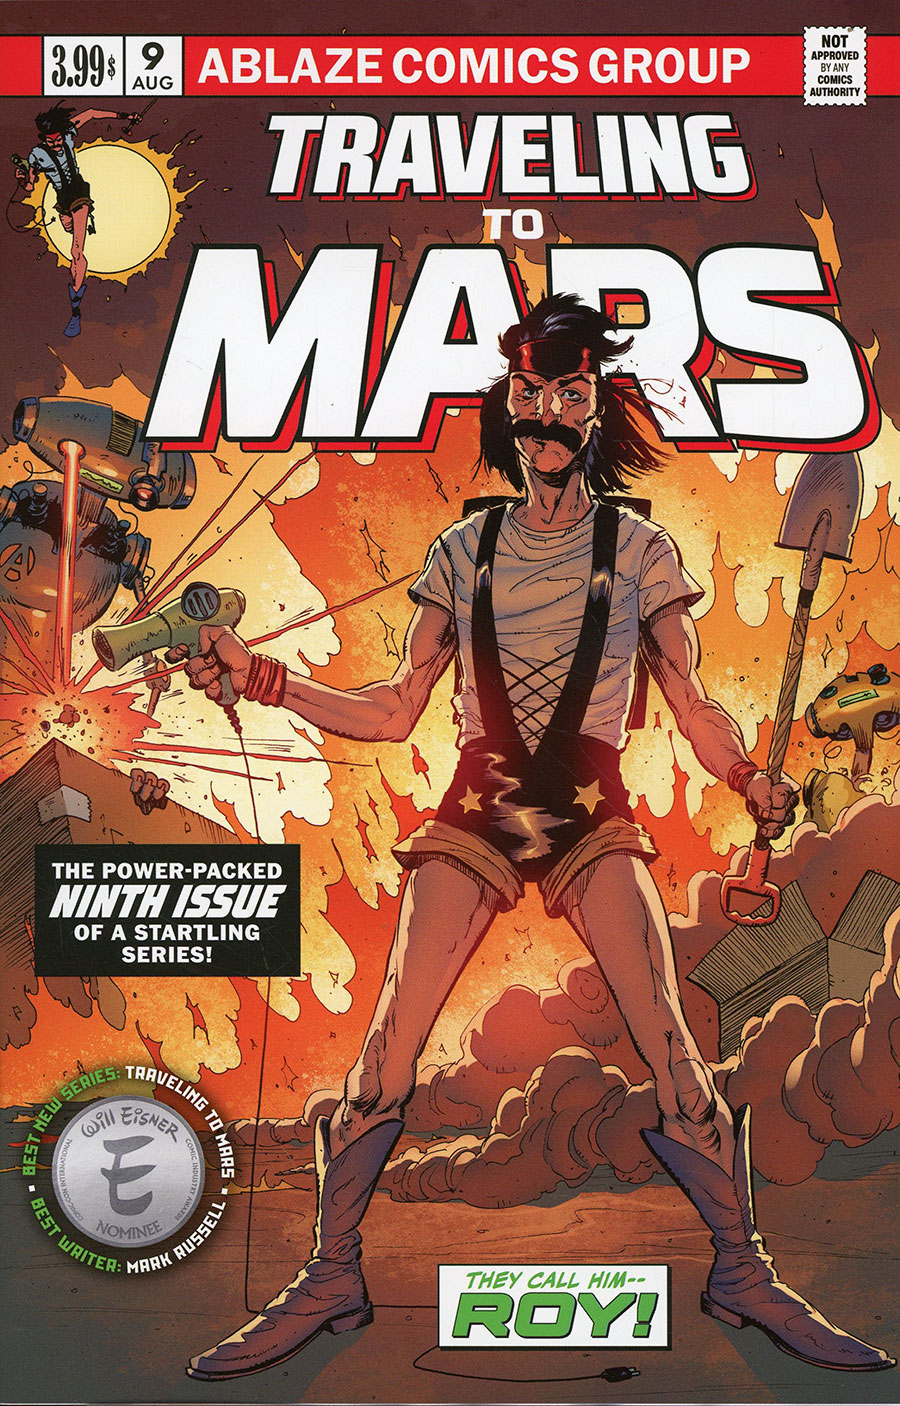 Traveling To Mars #9 Cover D Variant Brent McKee Marvel Comics Amazing Adventures 18 Parody Cover